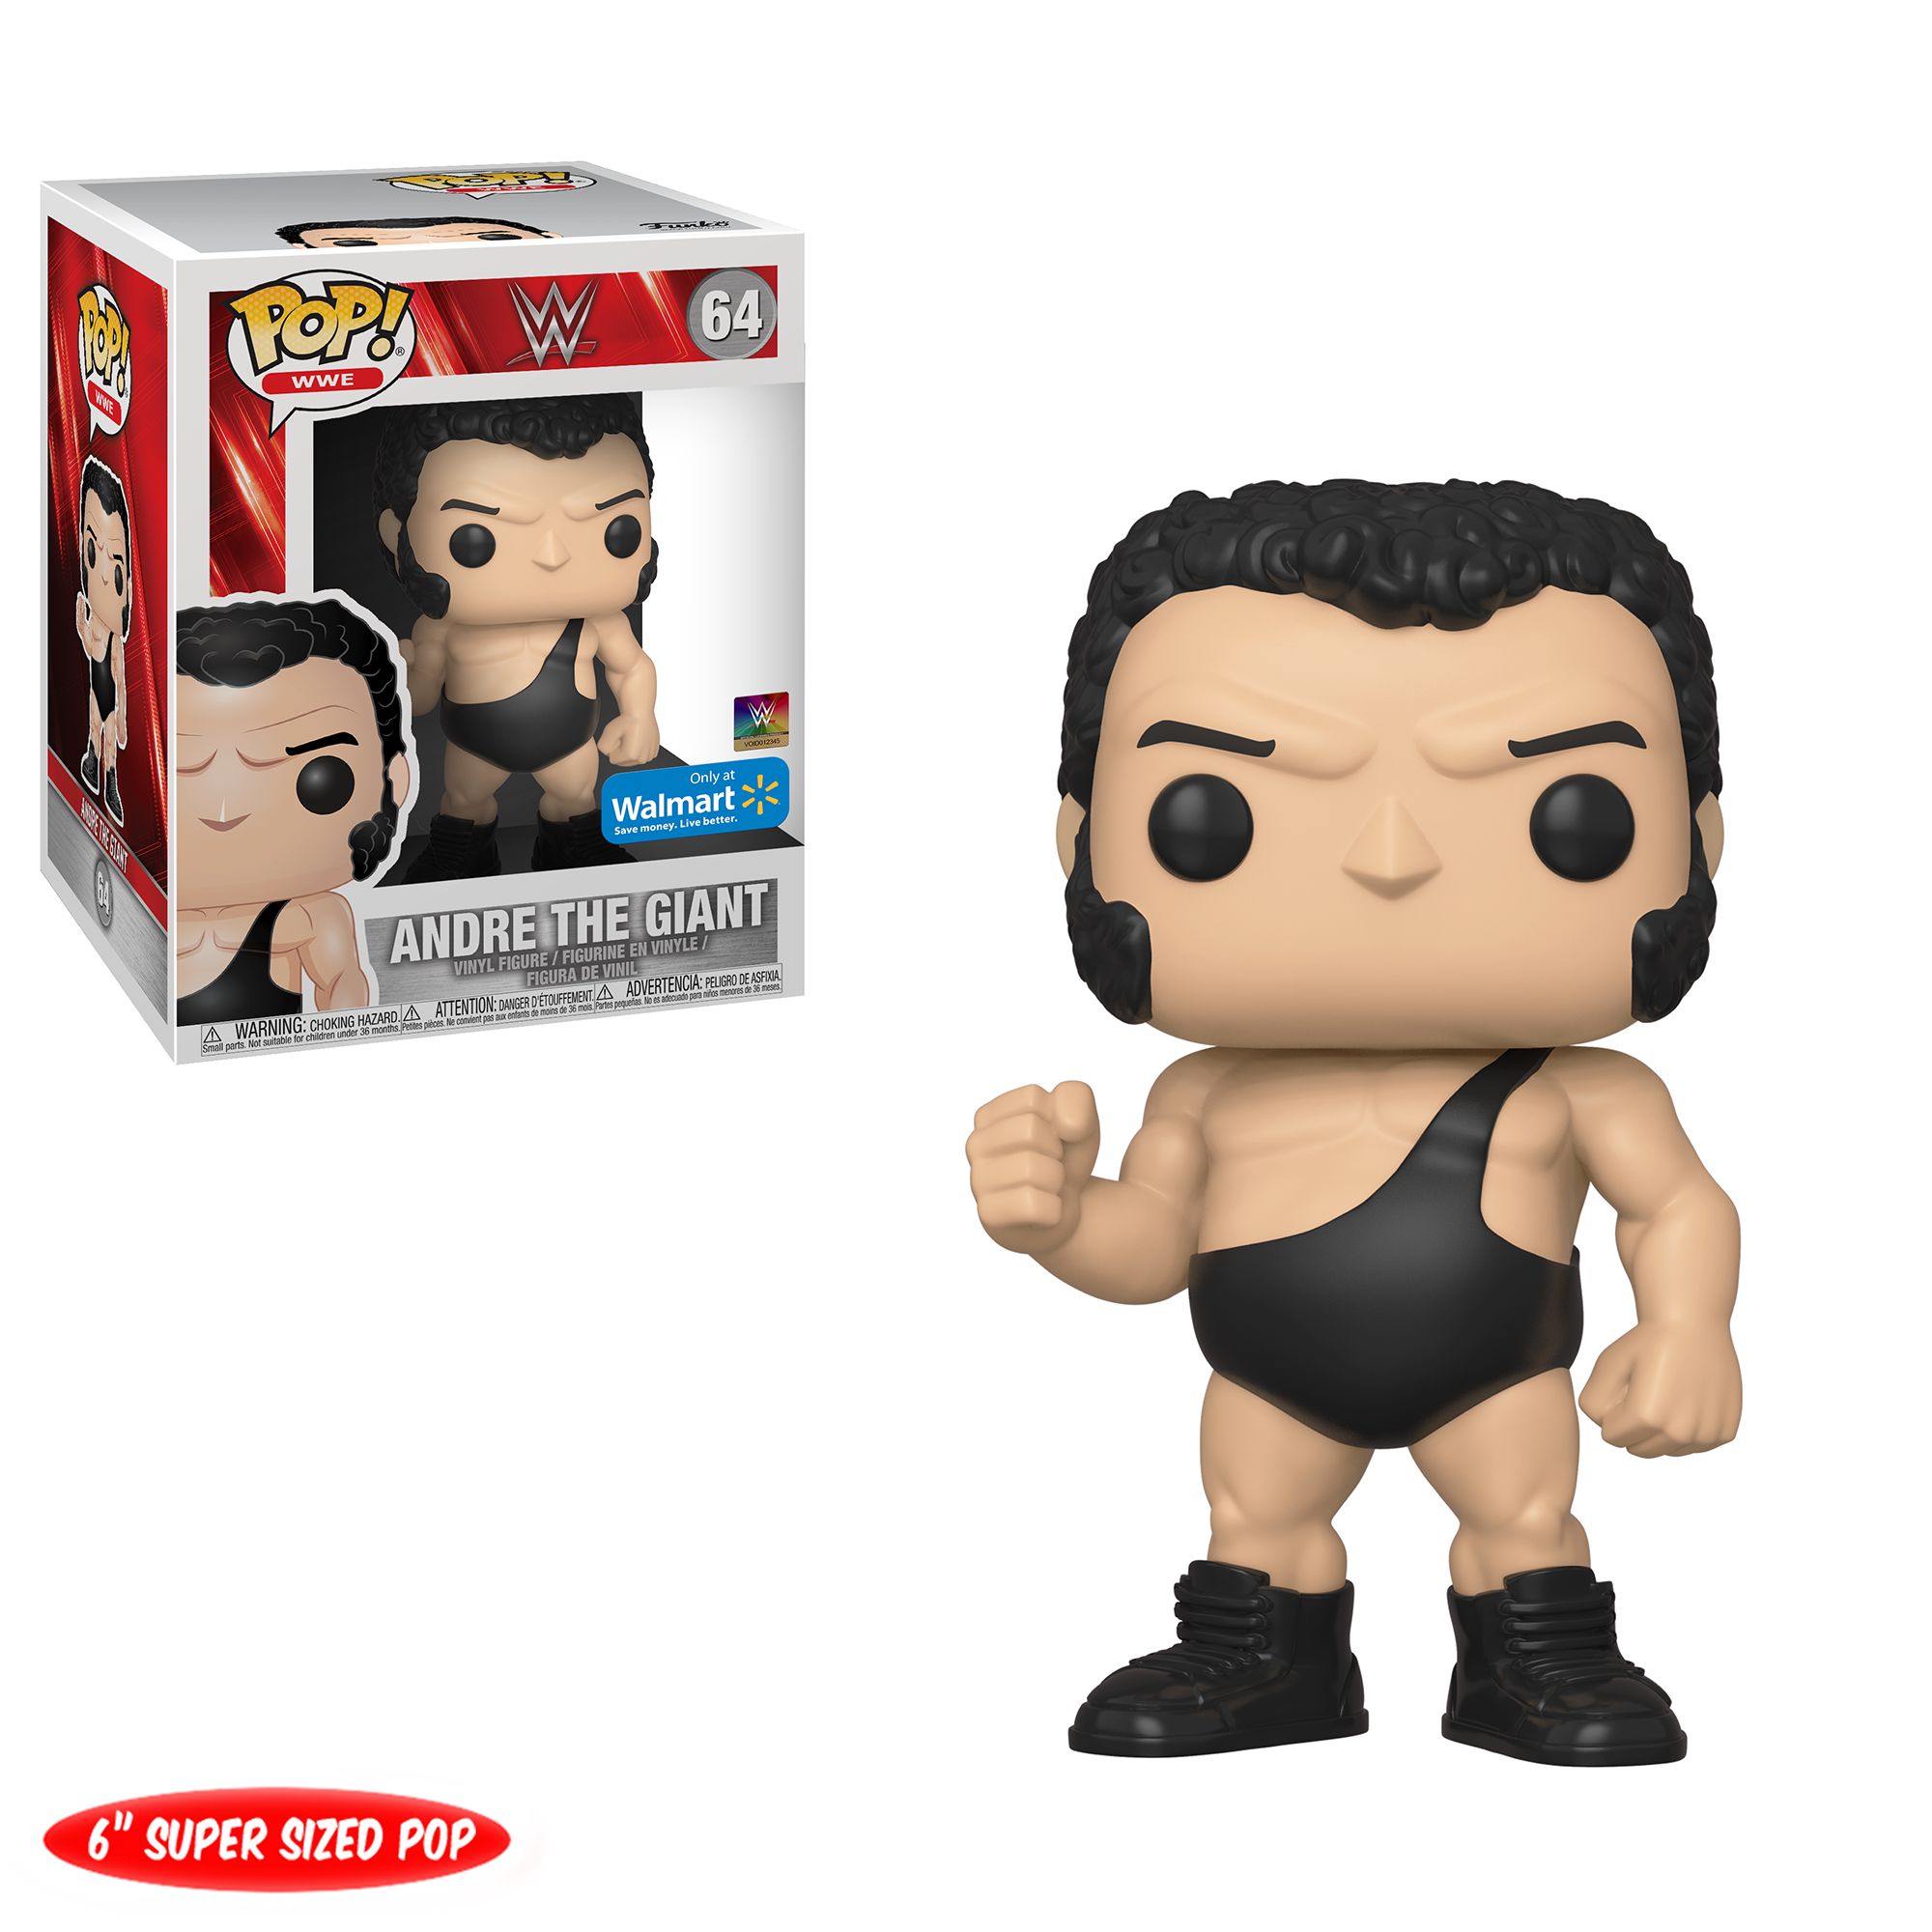 Funko POP! WWE: Andre The Giant 6" - Walmart Exclusive - image 2 of 2